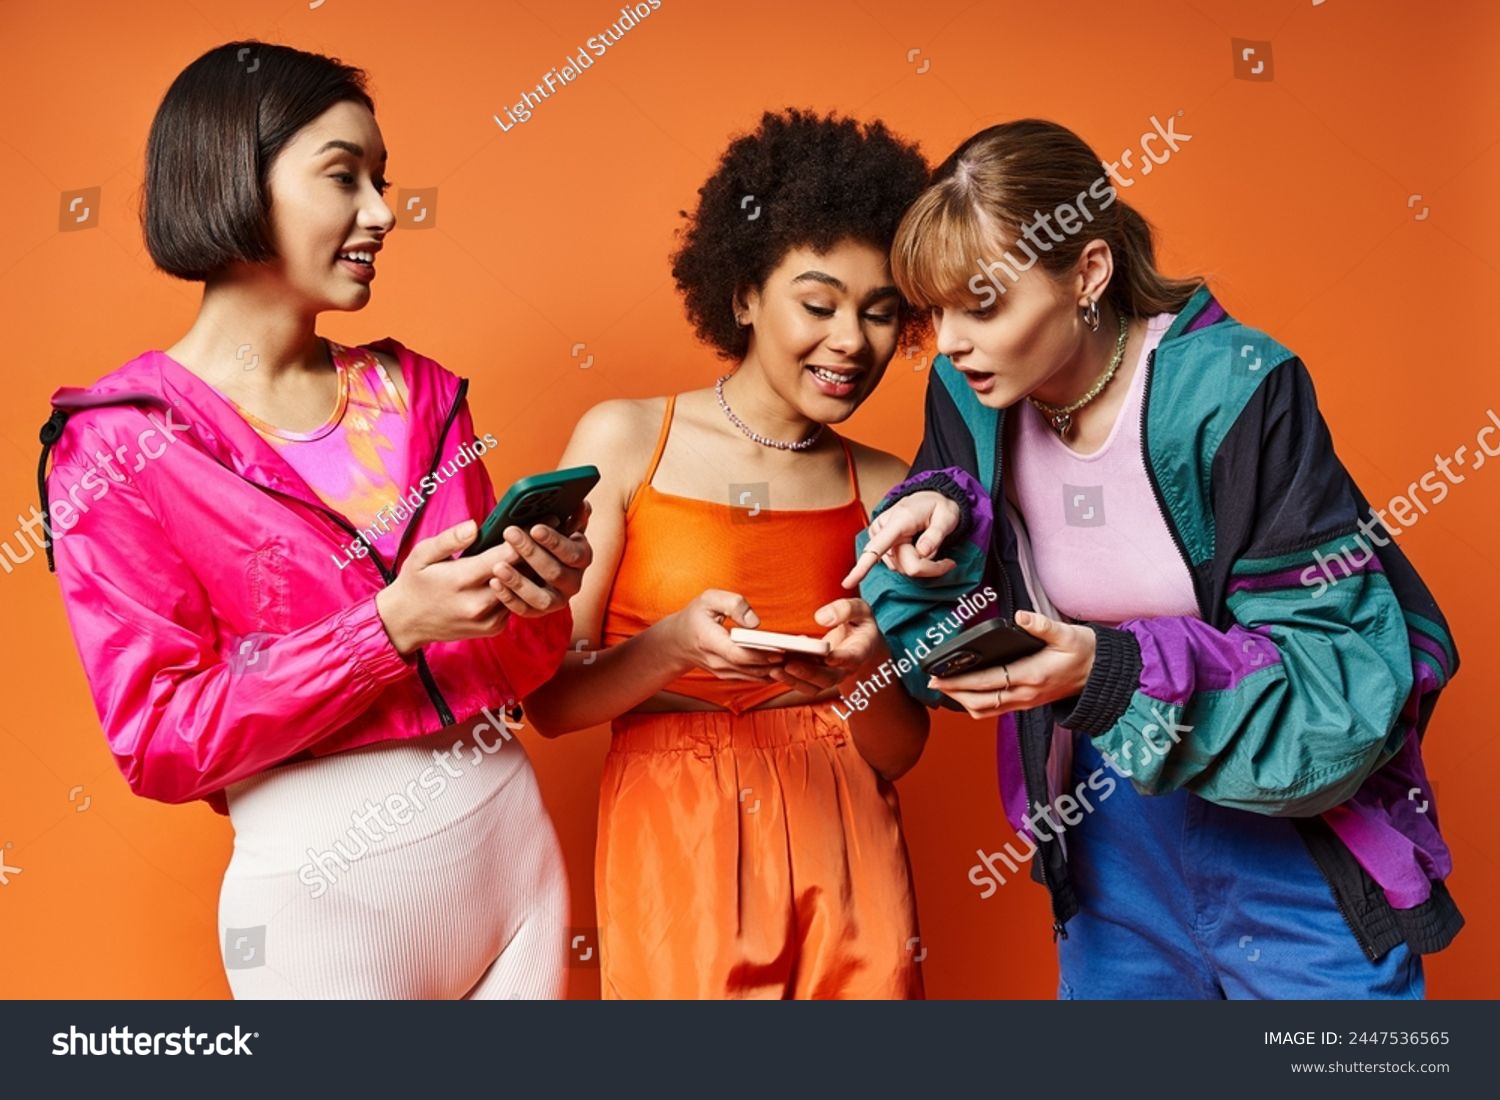 Three diverse women with different ethnicities standing next to each other, absorbed in their cell phones against an orange background. #2447536565